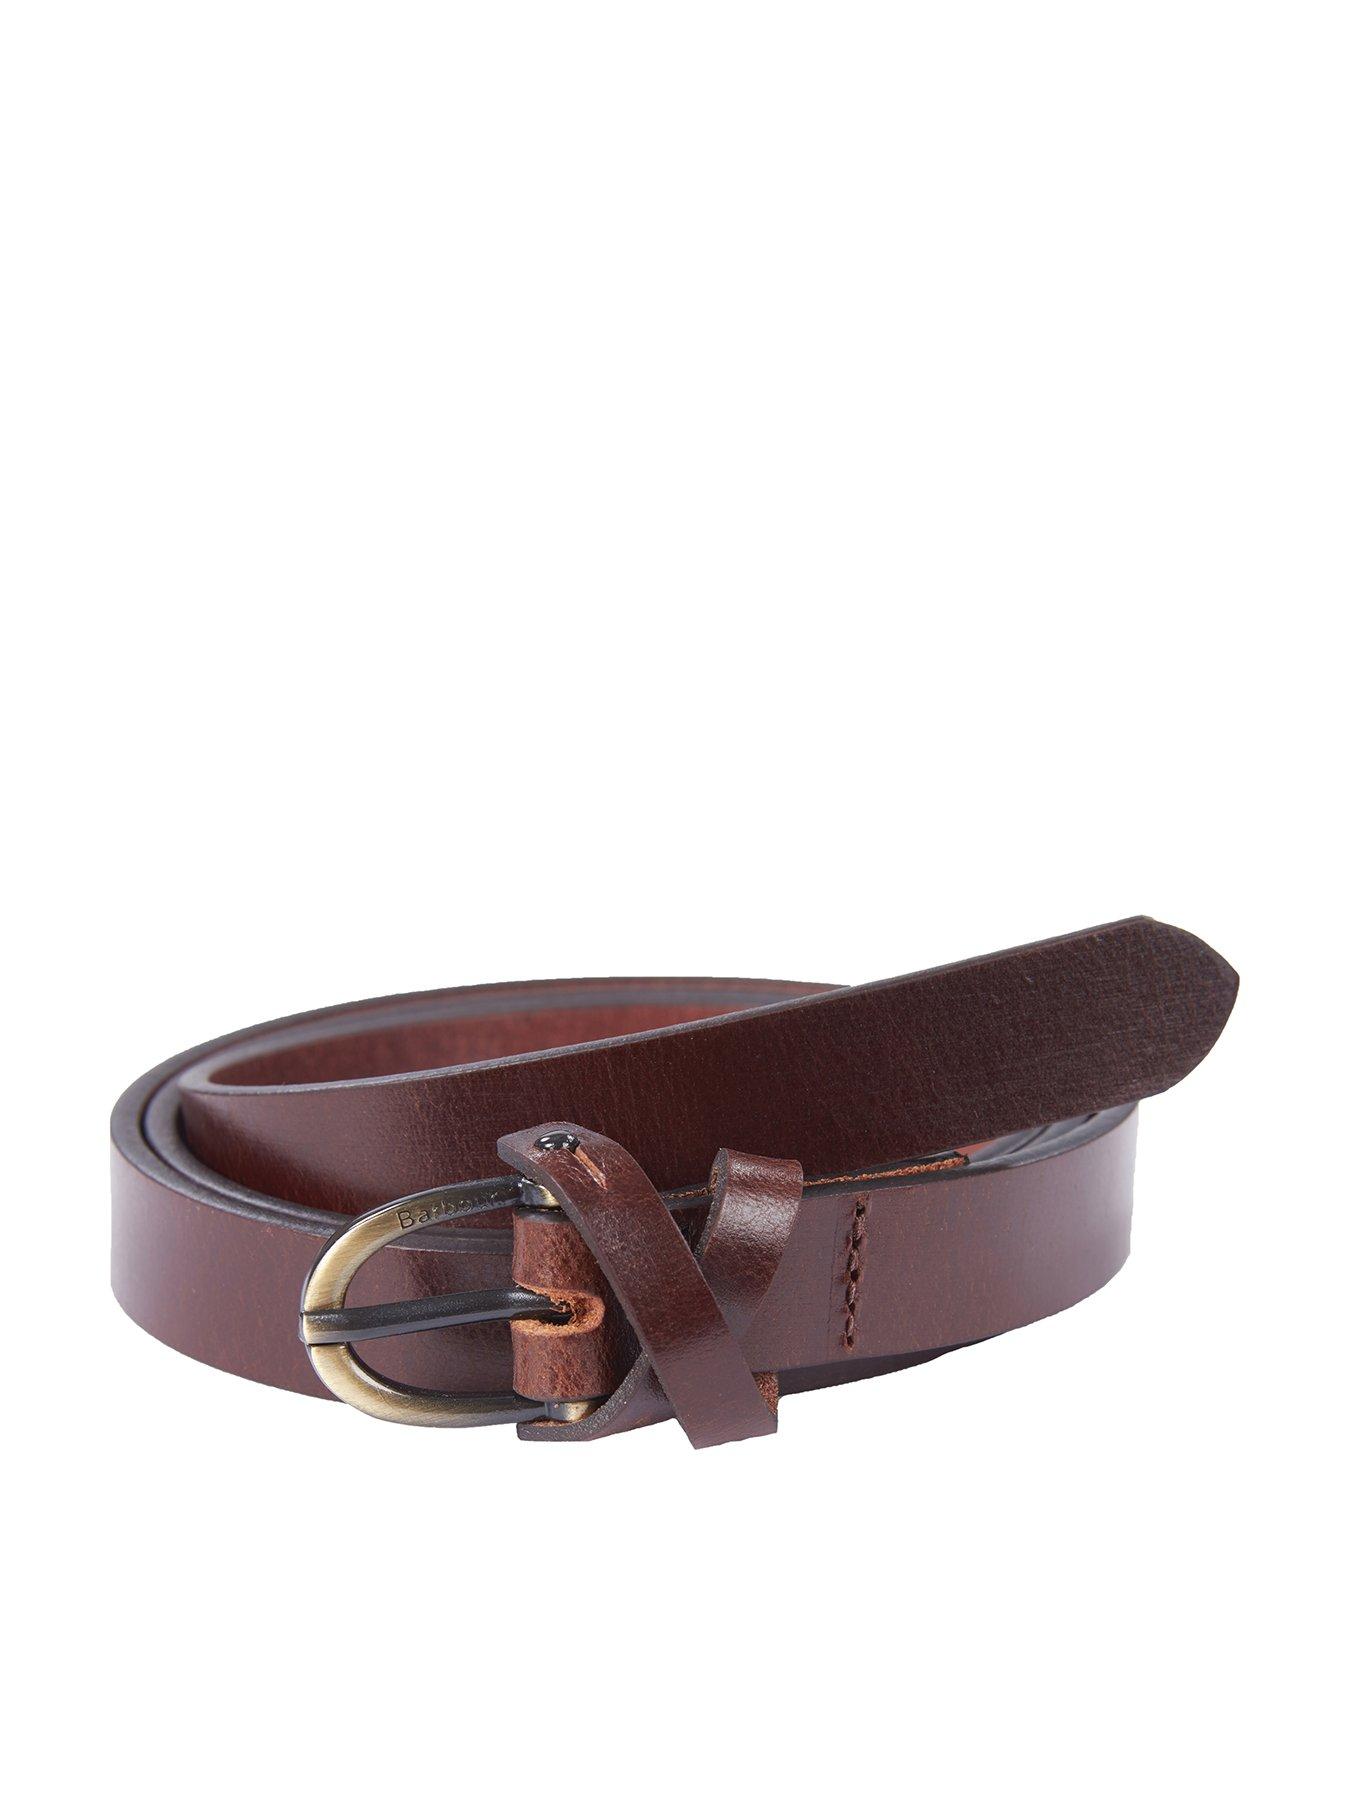 Accessories Cross Over Leather Belt - Brown